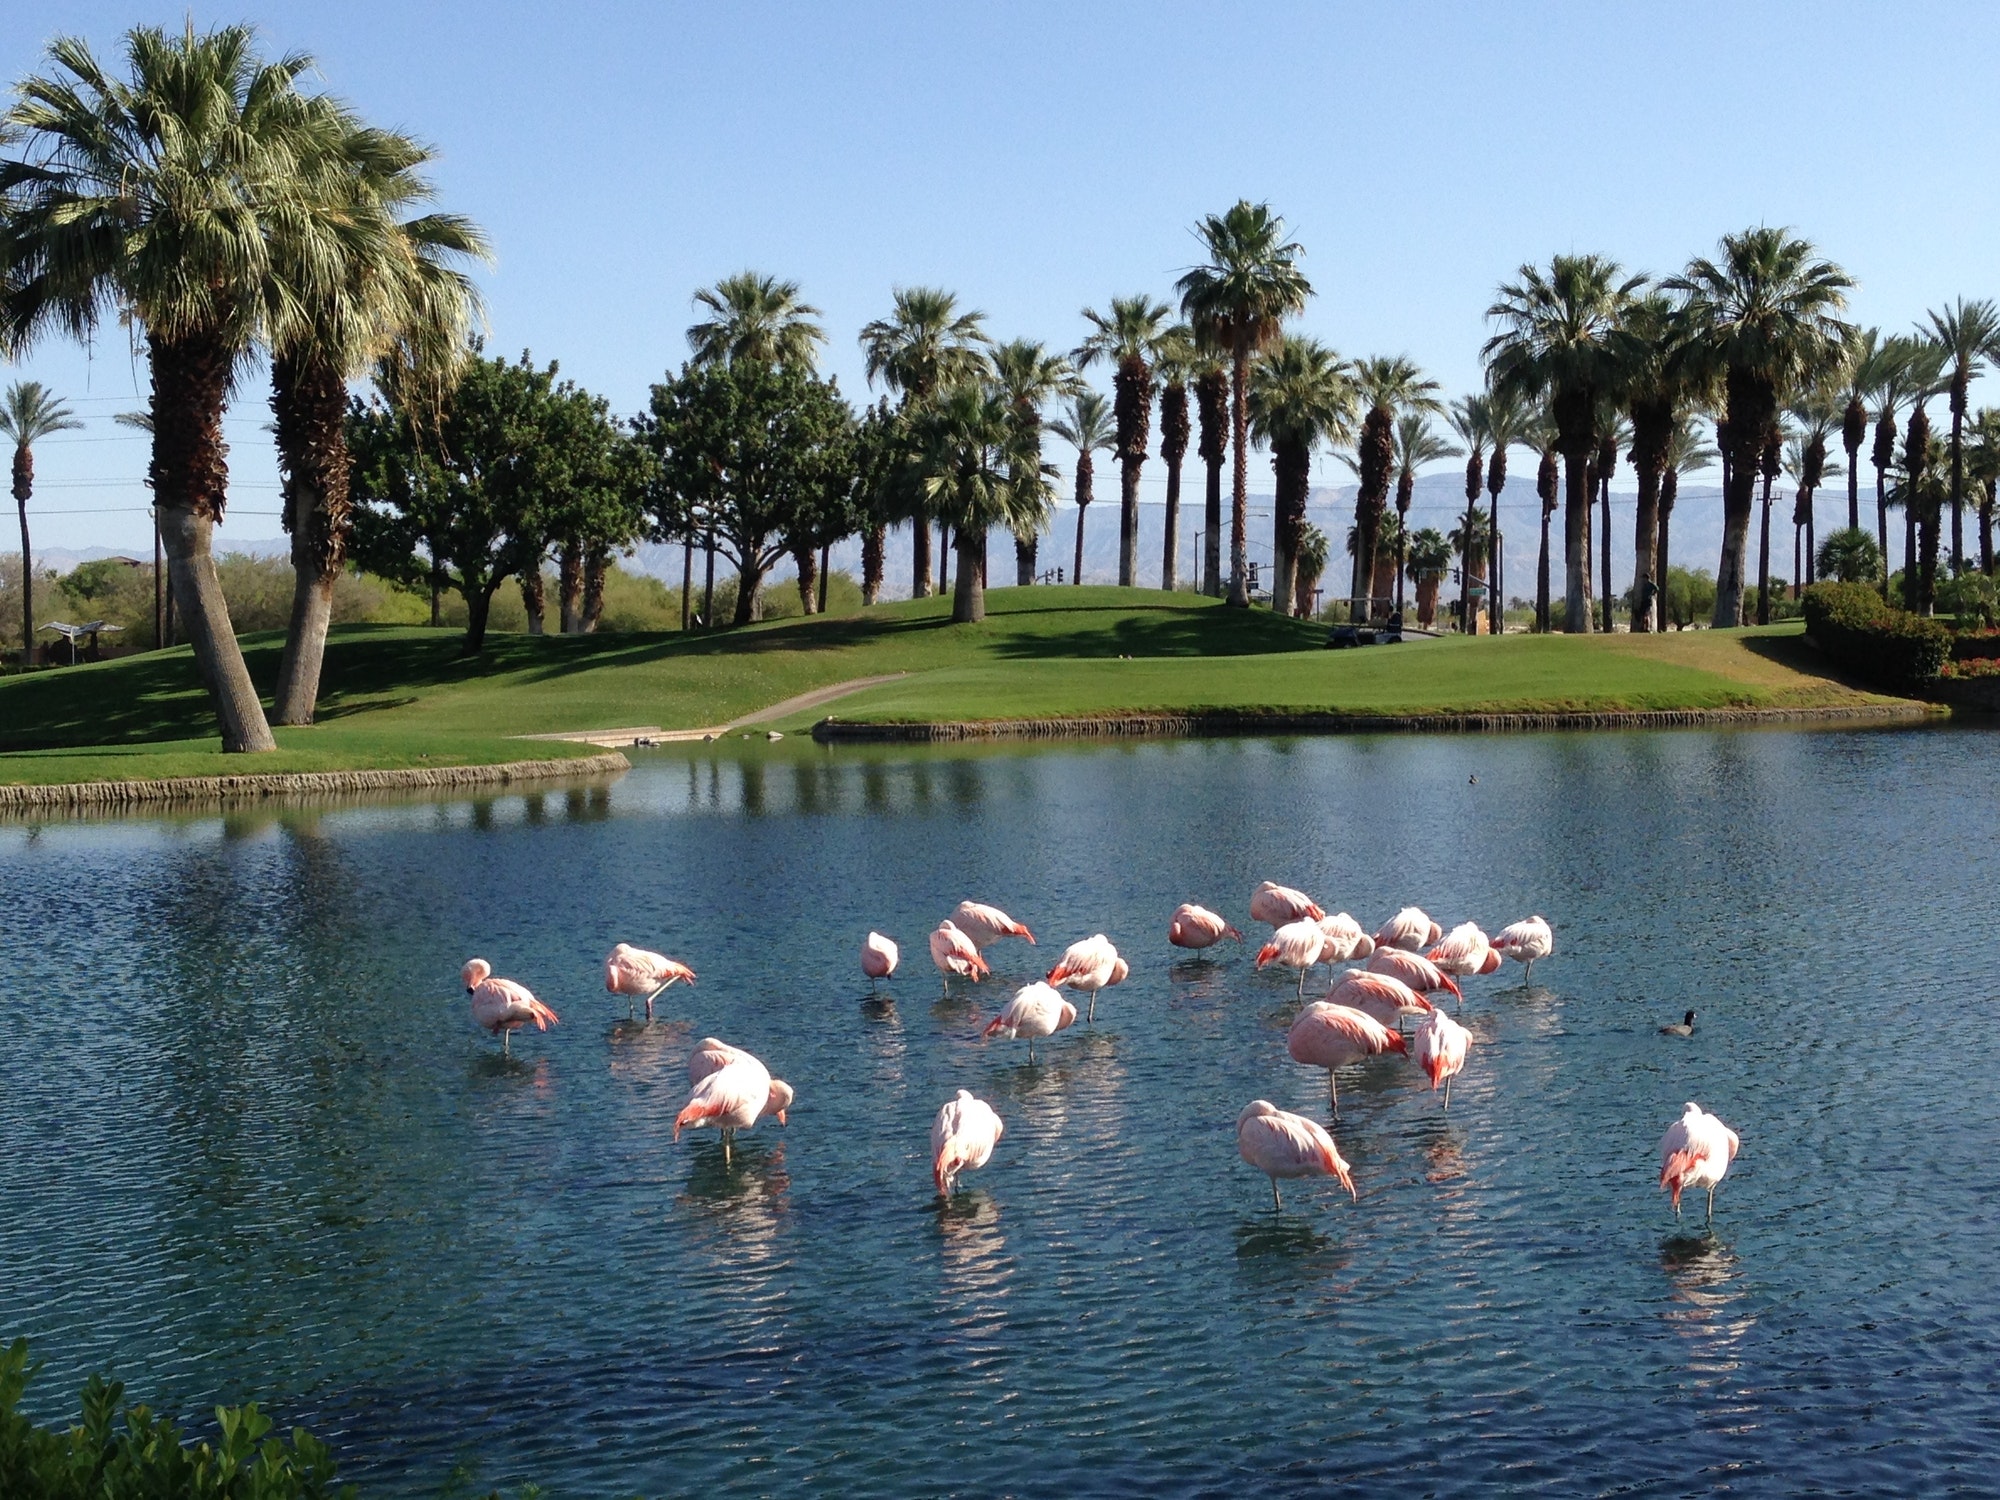 Pink flamingos in the pond in the desert at Palm Springs, California